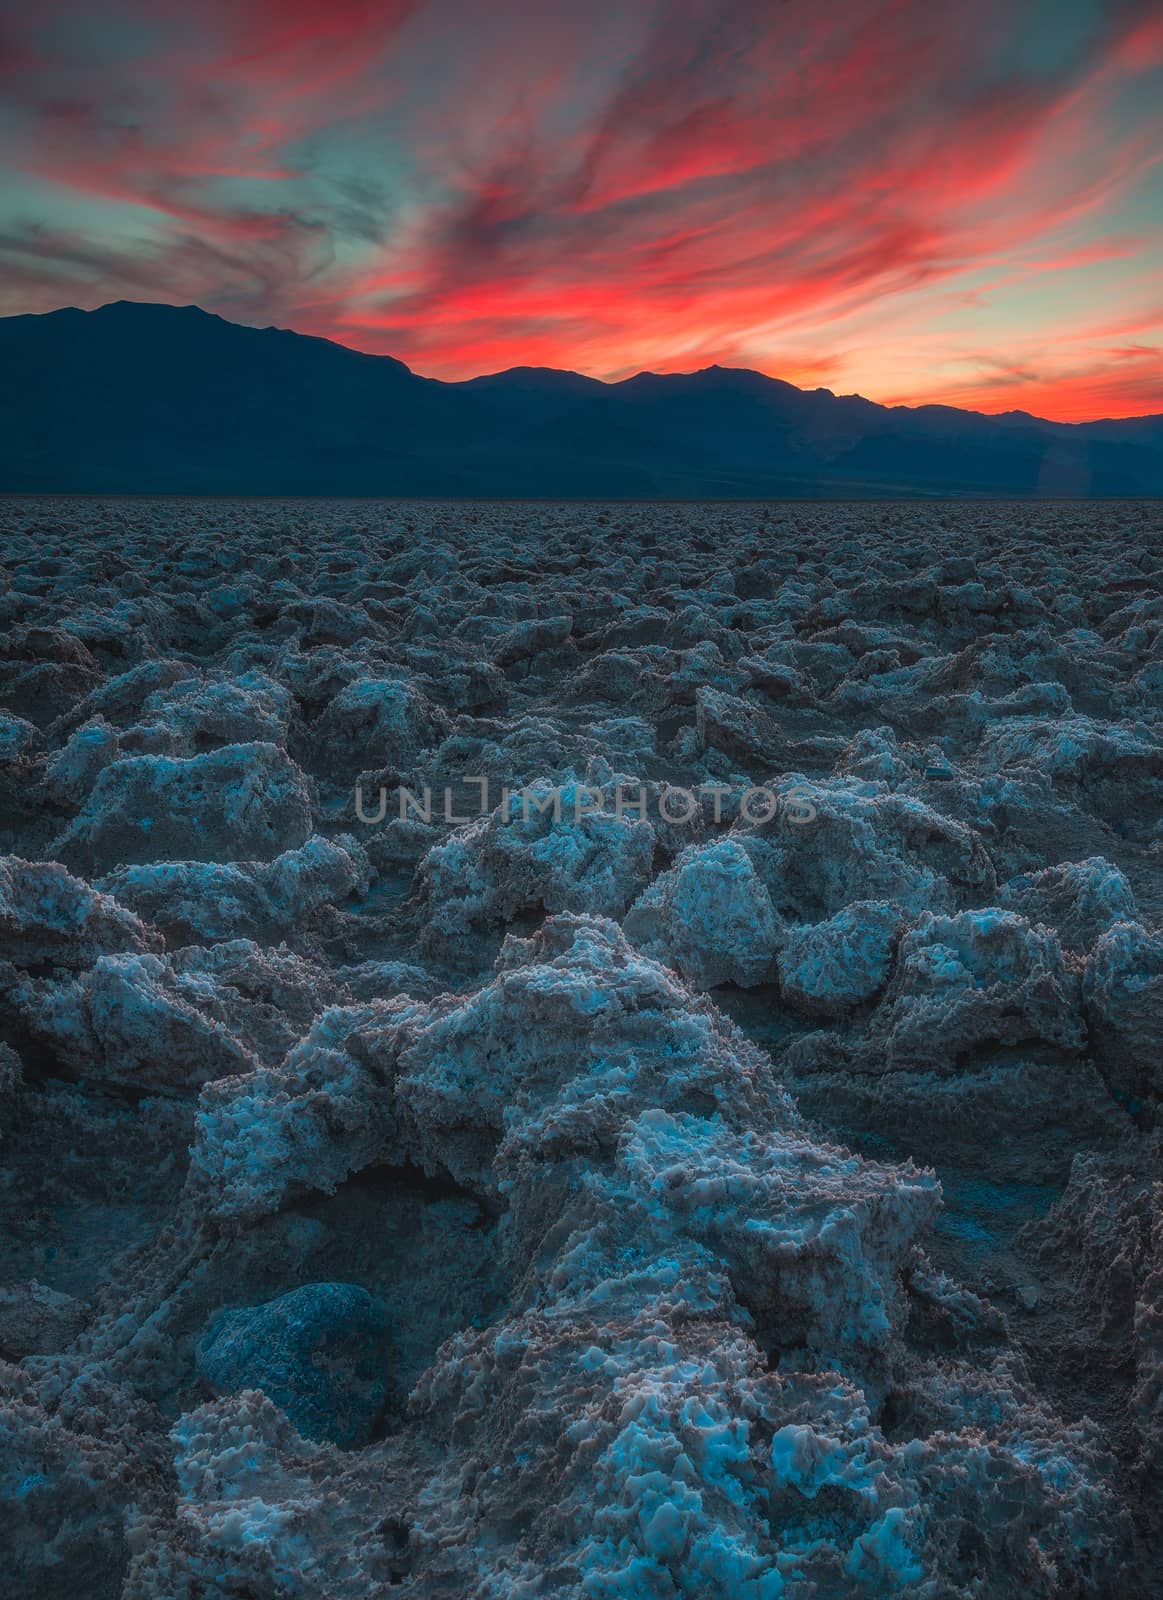 Death valley is one of the hottest regions on Earth with temperatures soaring past 135 degrees fahrenheit.